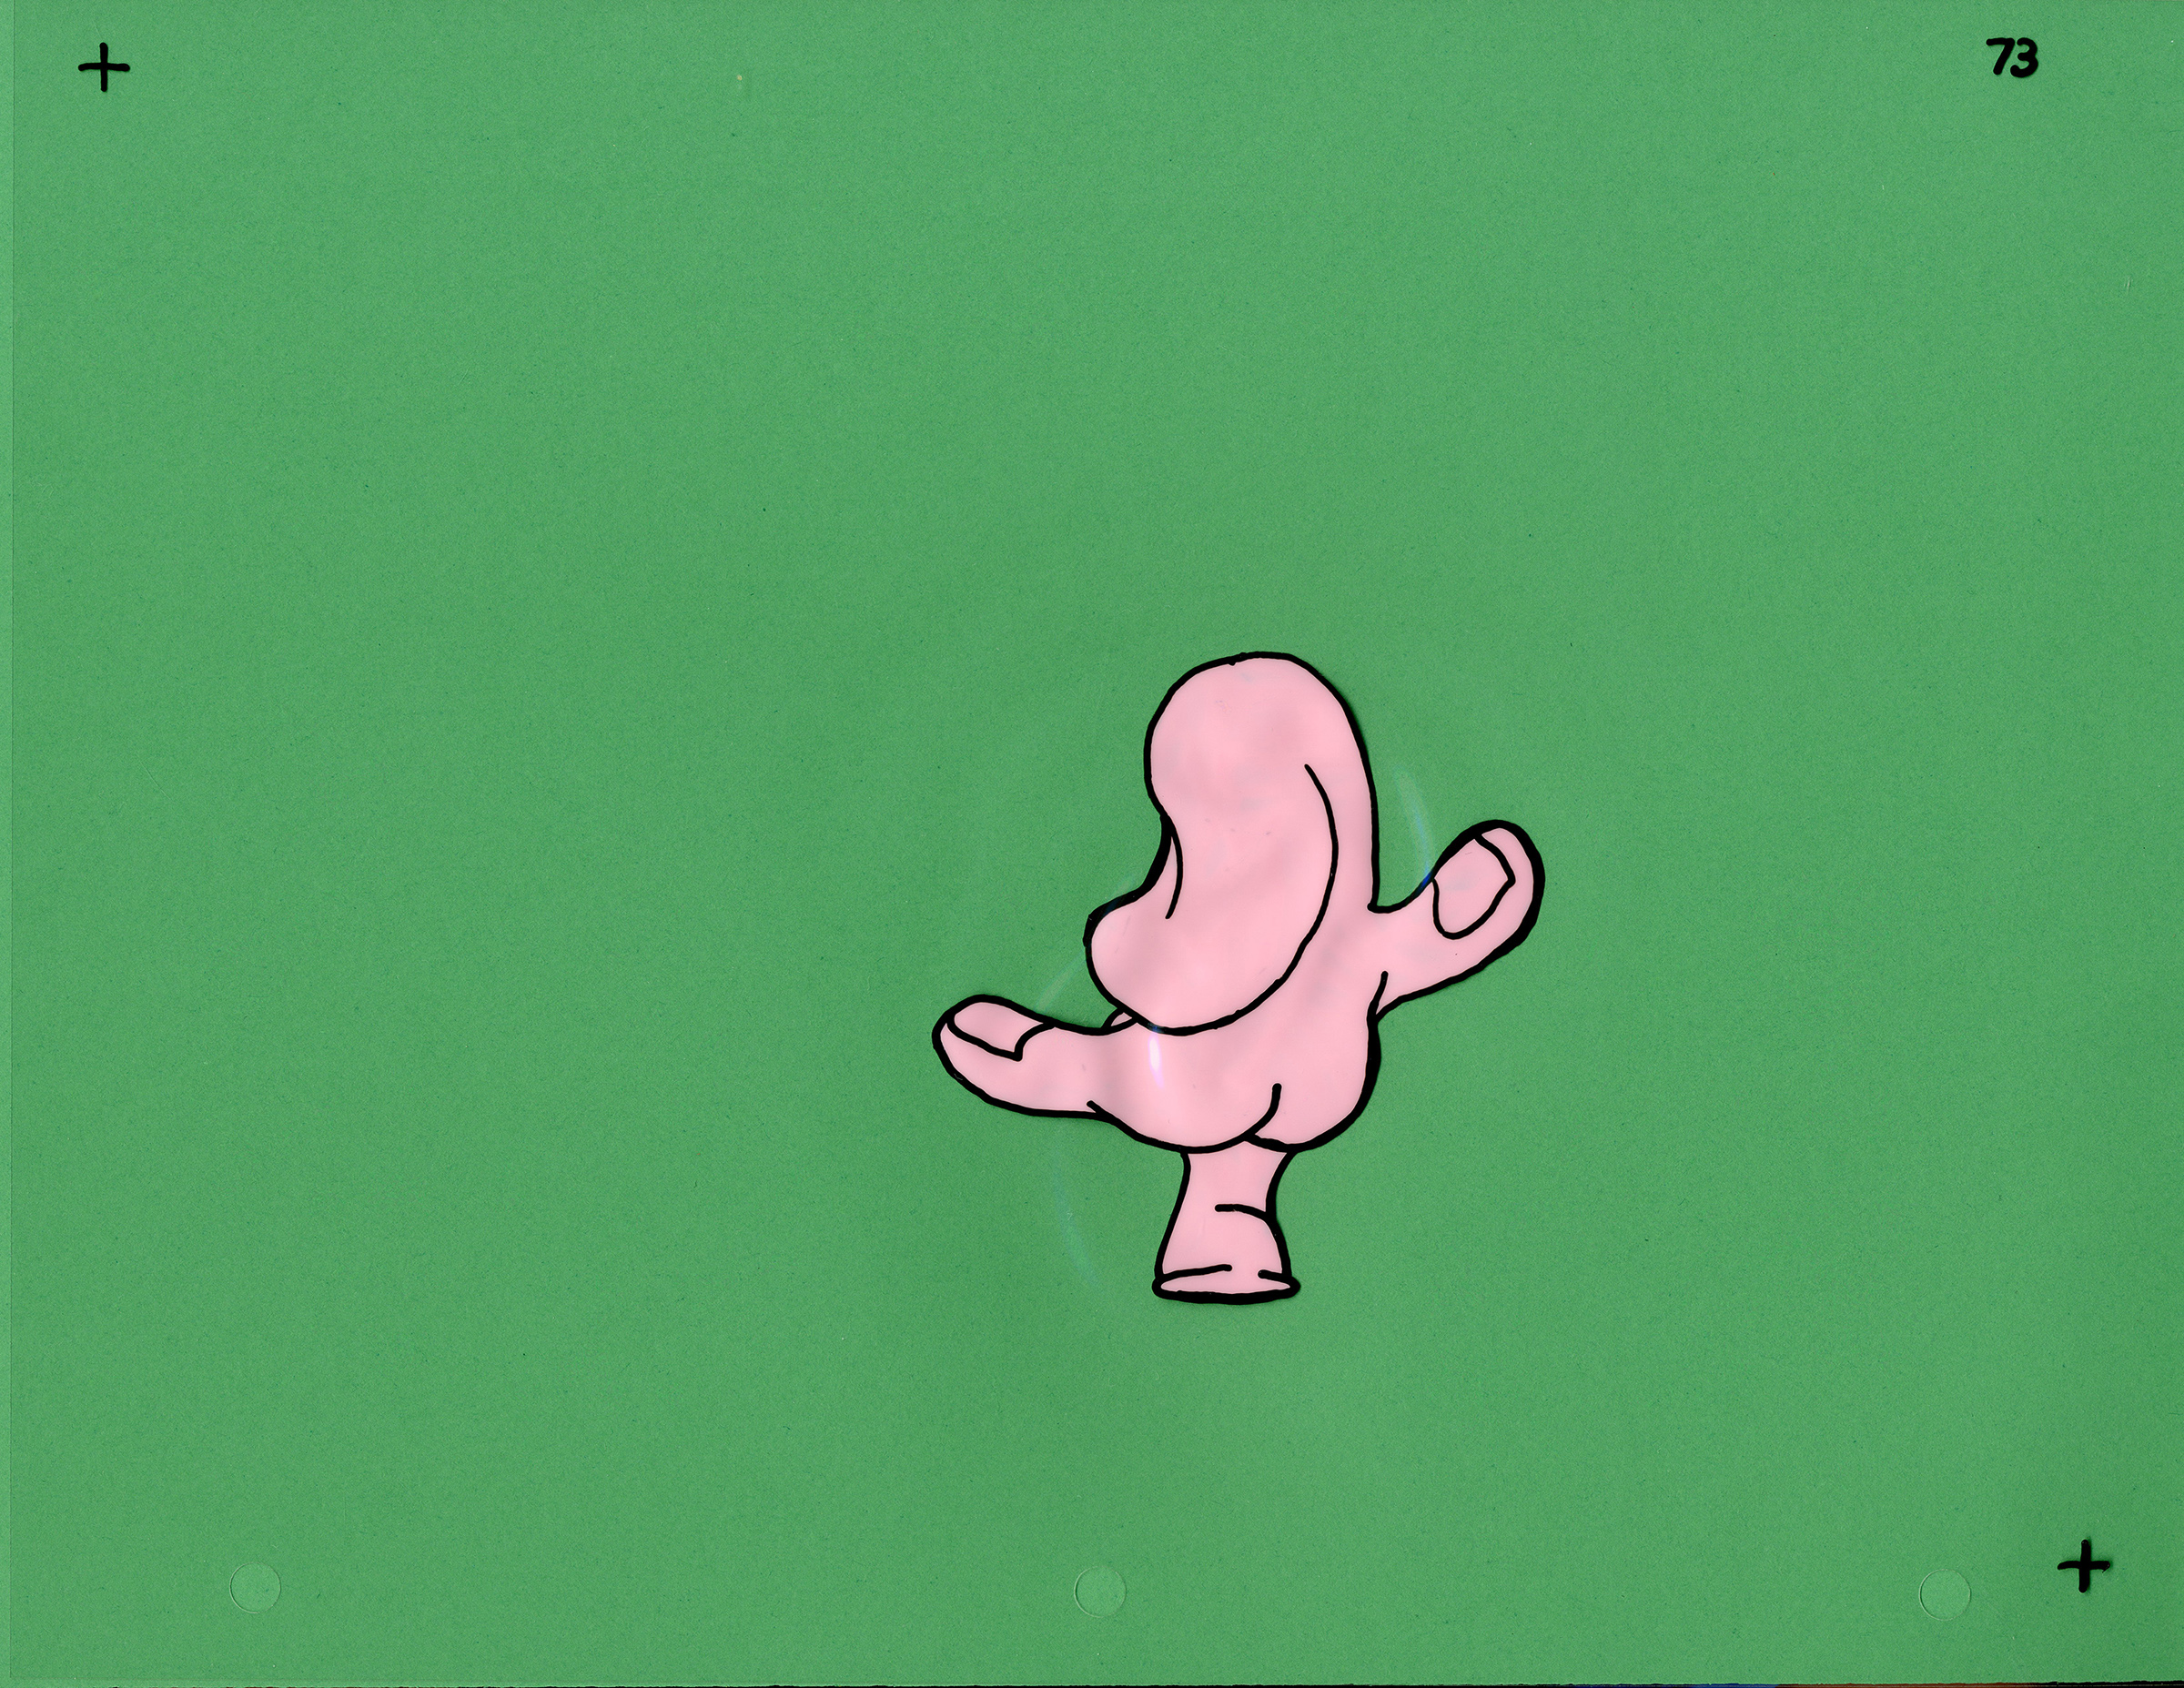 A scan of a hand-drawn animation cel with a disembodied cartoon hand. Thick black lines define the pink hand, which balances on one finger in a dancerly pose.